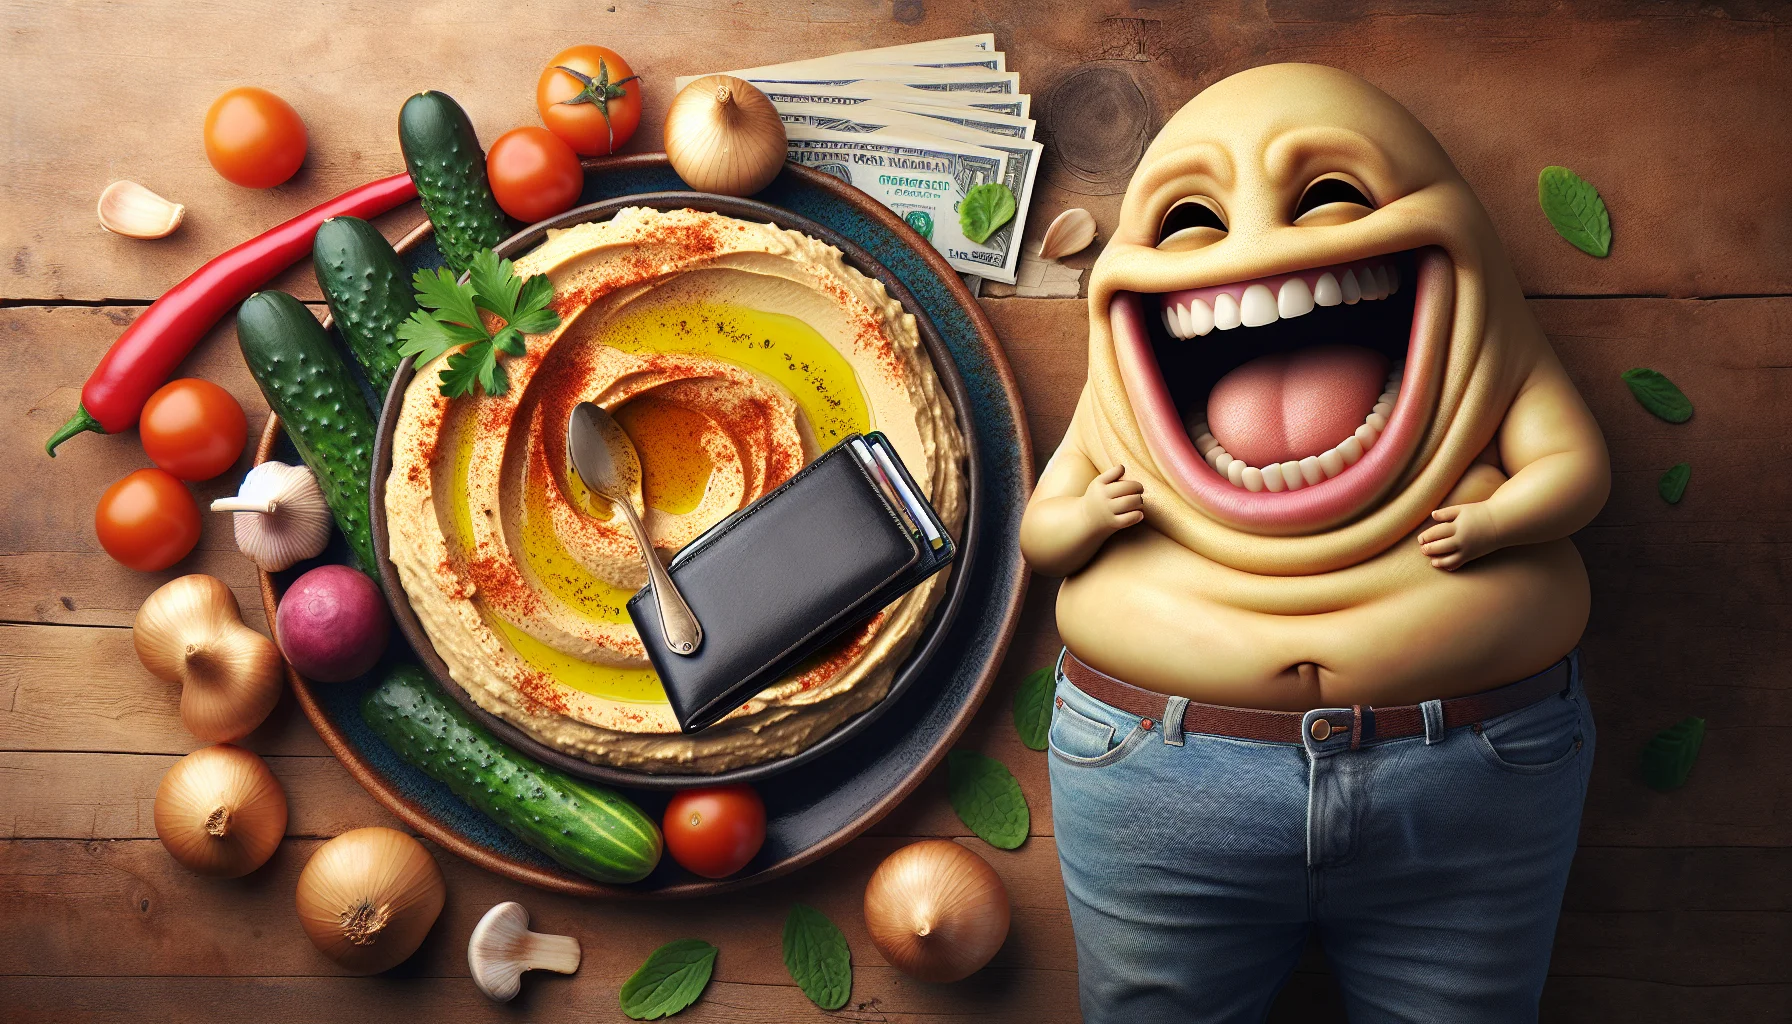 Create an engaging scene depicting a comical situation centered on a generic brand of hummus. Picture a bulging wallet chuckling joyously beside a platter of delicious, golden hummus seasoned with olive oil and sprinkled with paprika. All of this is set on a rustic table. An assortment of vibrant, crisp vegetables surround the platter, ready for dipping. The image conveys a clear, irresistible suggestion that eating healthily is not only a delightful pleasure but also a cost-effective choice.